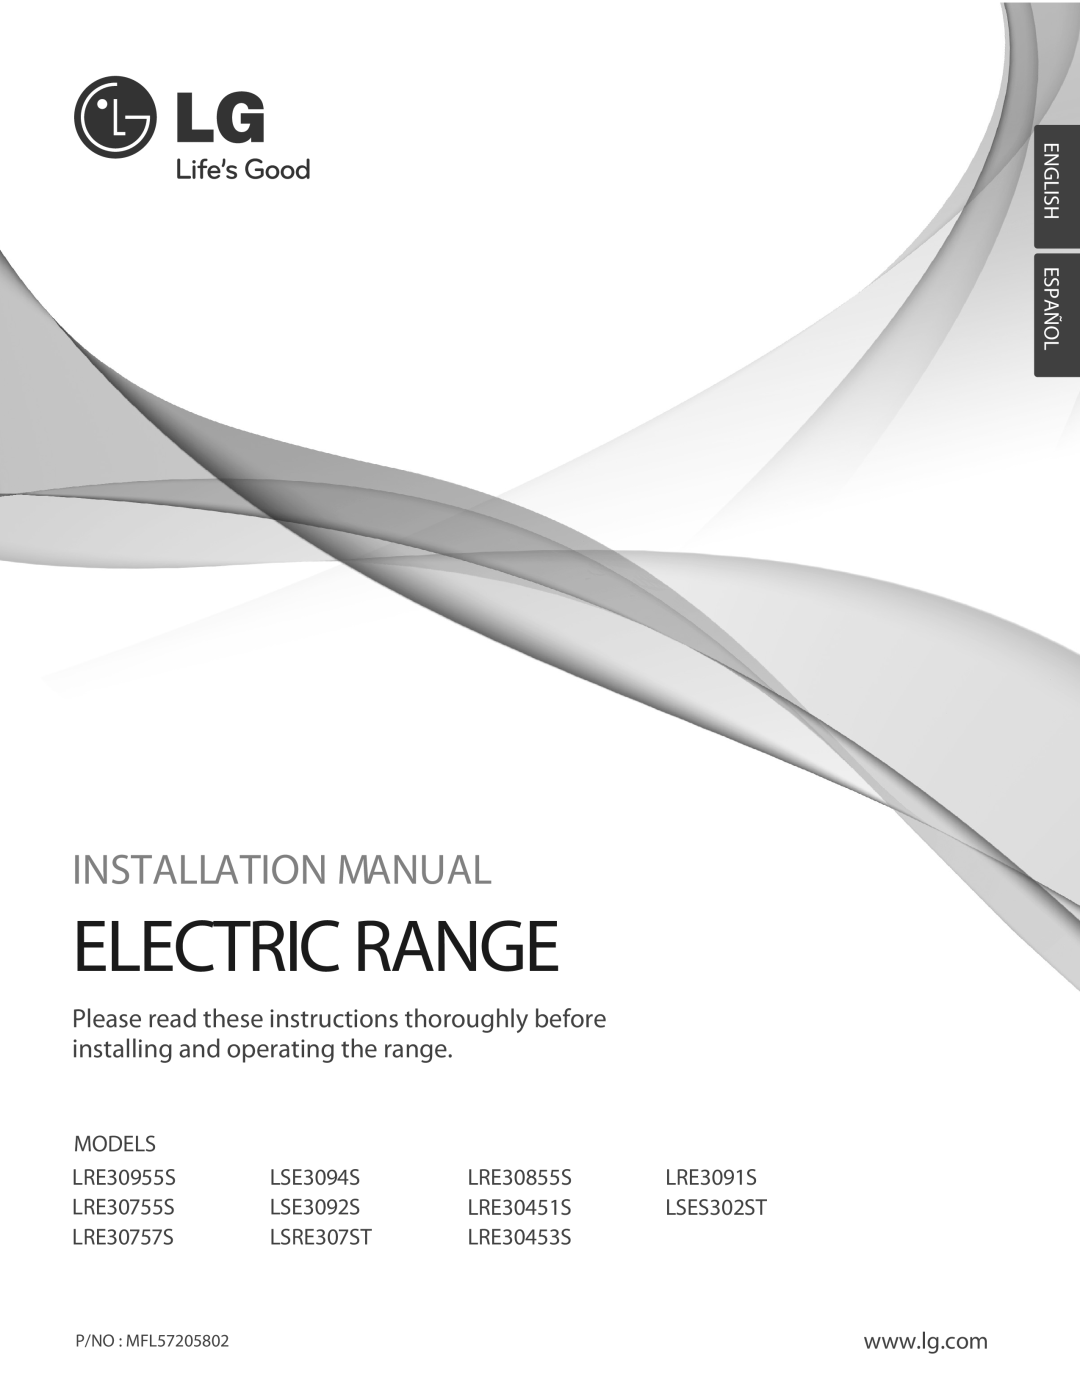 LG Electronics LRE3091S installation manual Electric Range, Installation Manual, Models, LRE30955S, LSE3094S, LRE30855S 